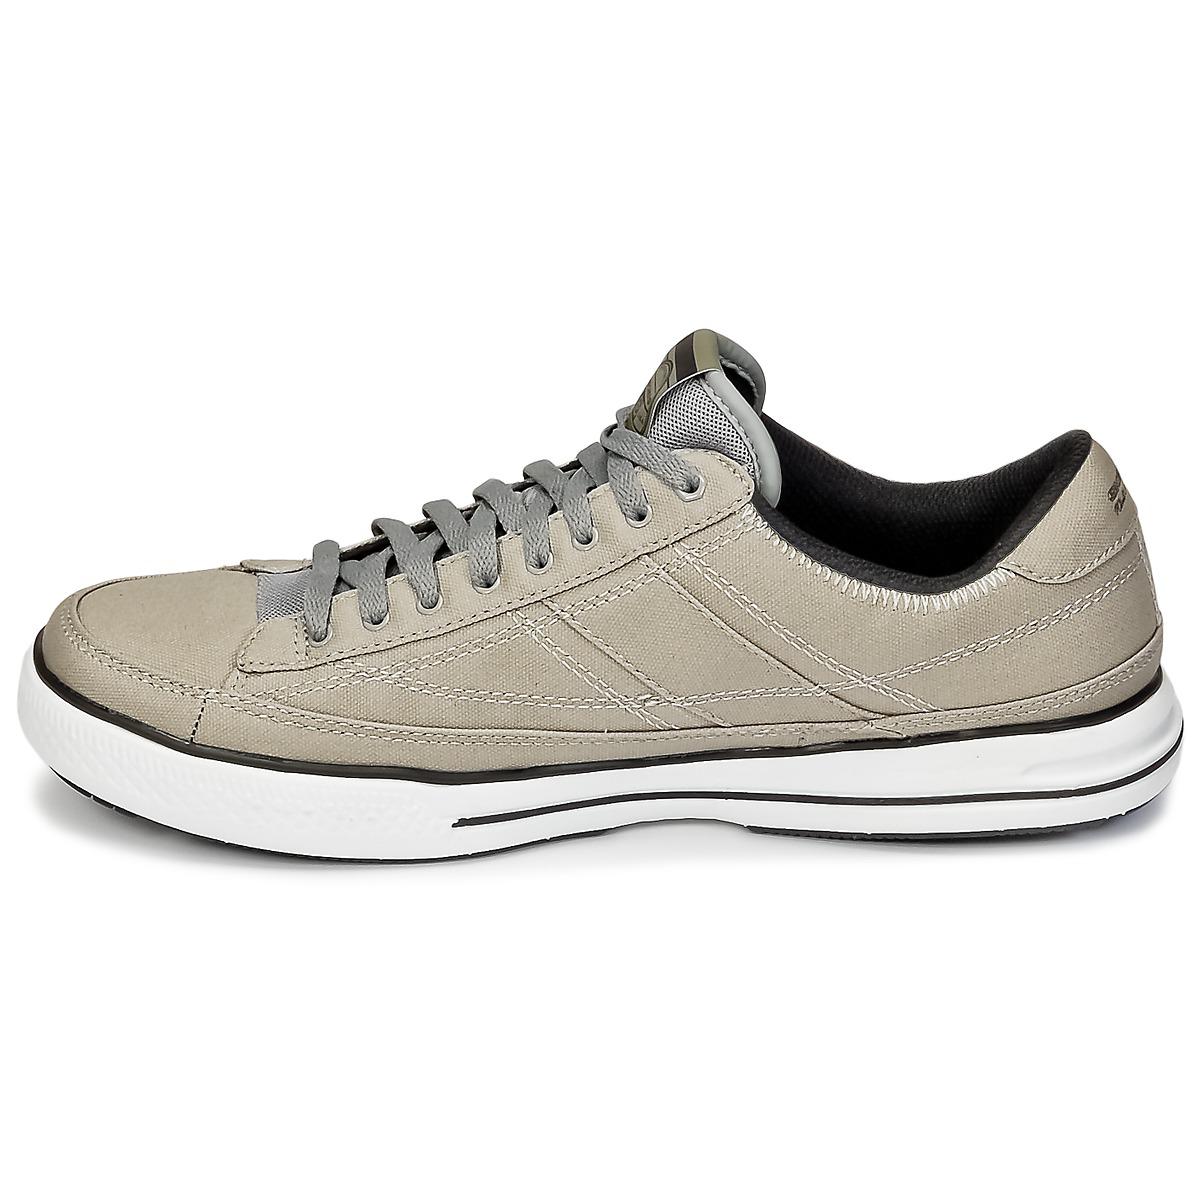 Skechers Arcade Shoes (trainers) in Grey (Grey) for Men - Lyst